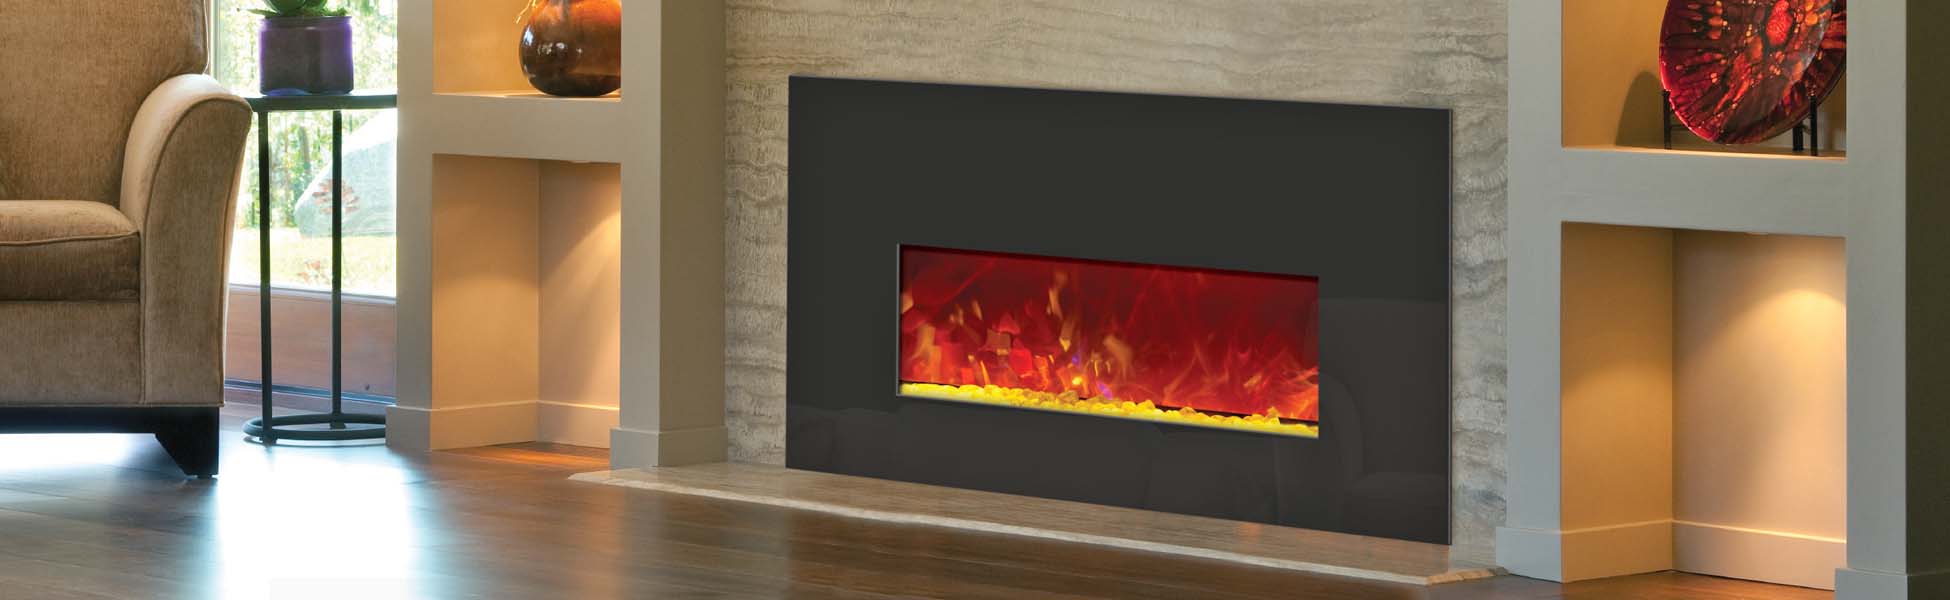 small electric fireplace insert